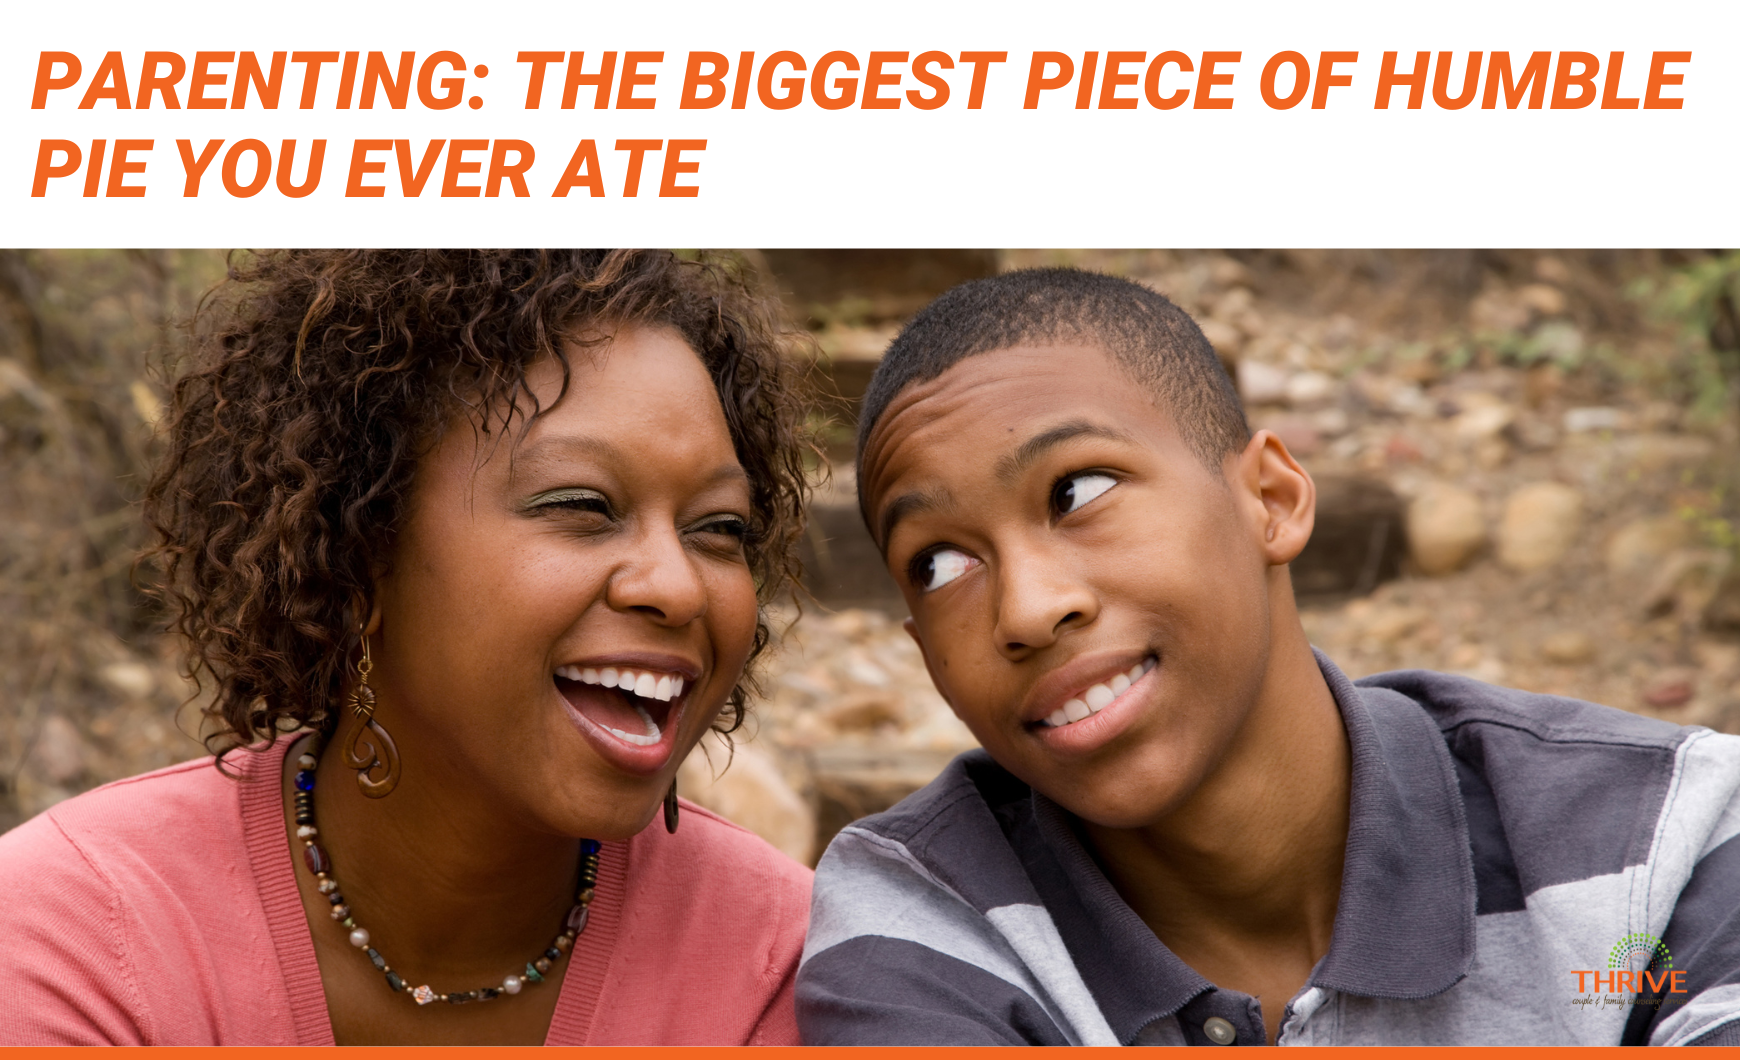 Orange text that reads "Parenting: The Biggest Piece of Humble Pie You Ever Ate" above a photo of a Black woman and teen. The woman is laughing and the teen is looking at her with an eye roll.